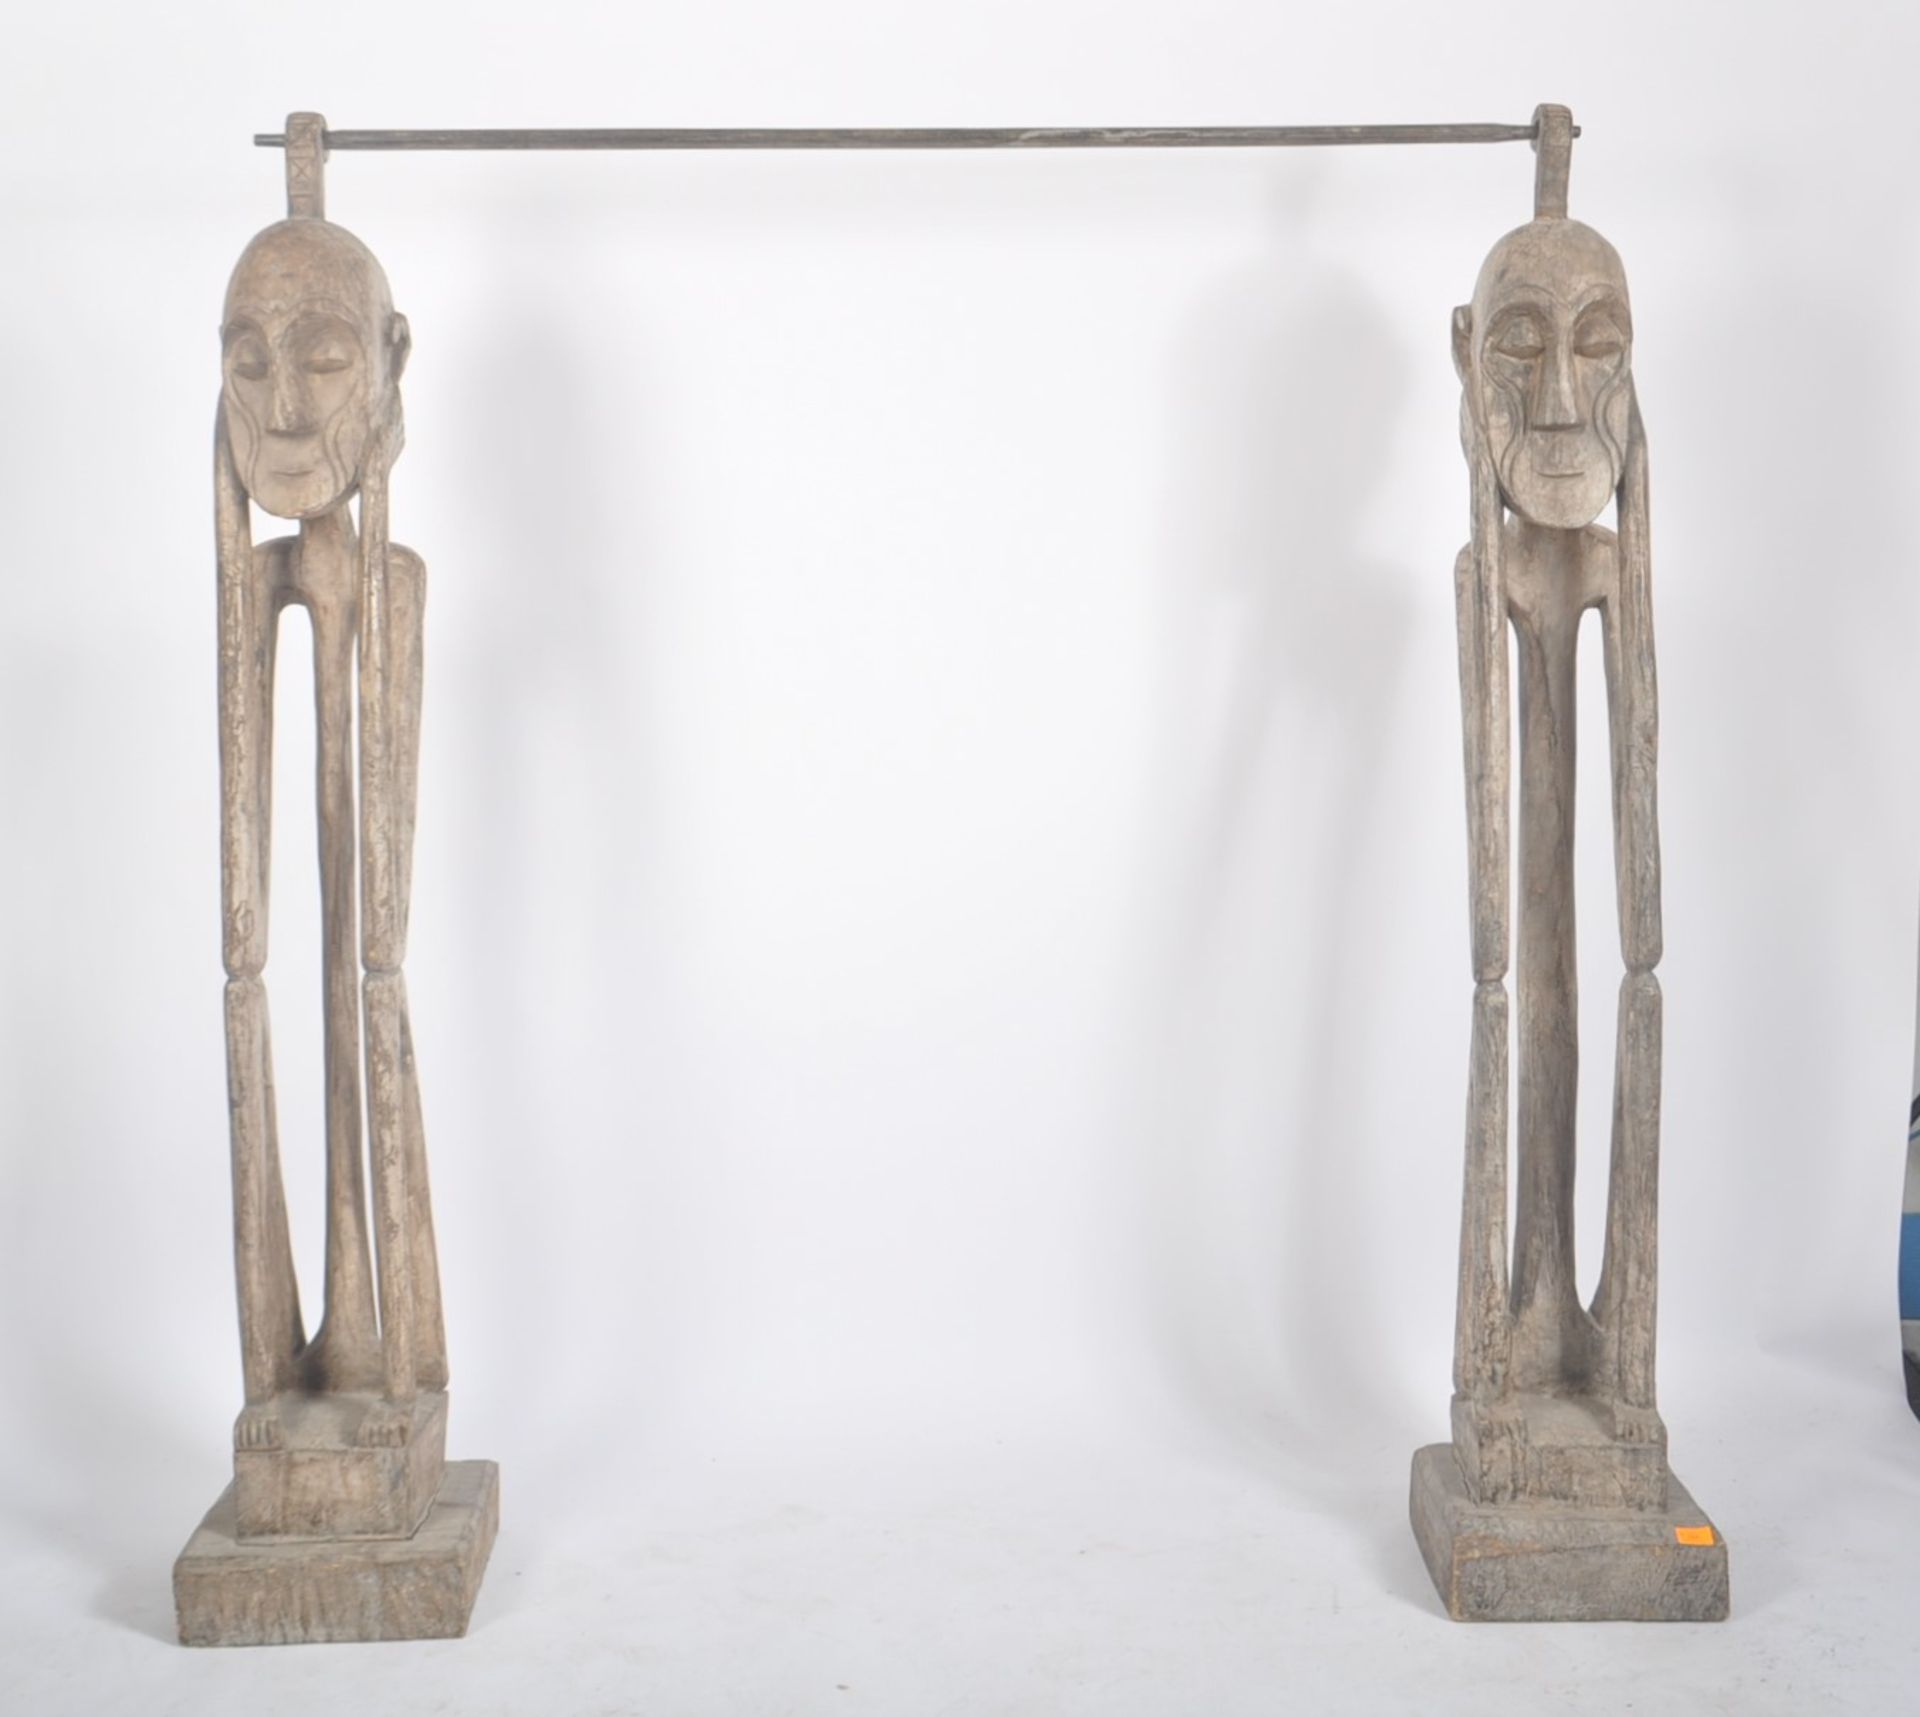 LARGE PAIR OF INTERIOR DESIGN CARVED WOOD STATUES - Image 2 of 11